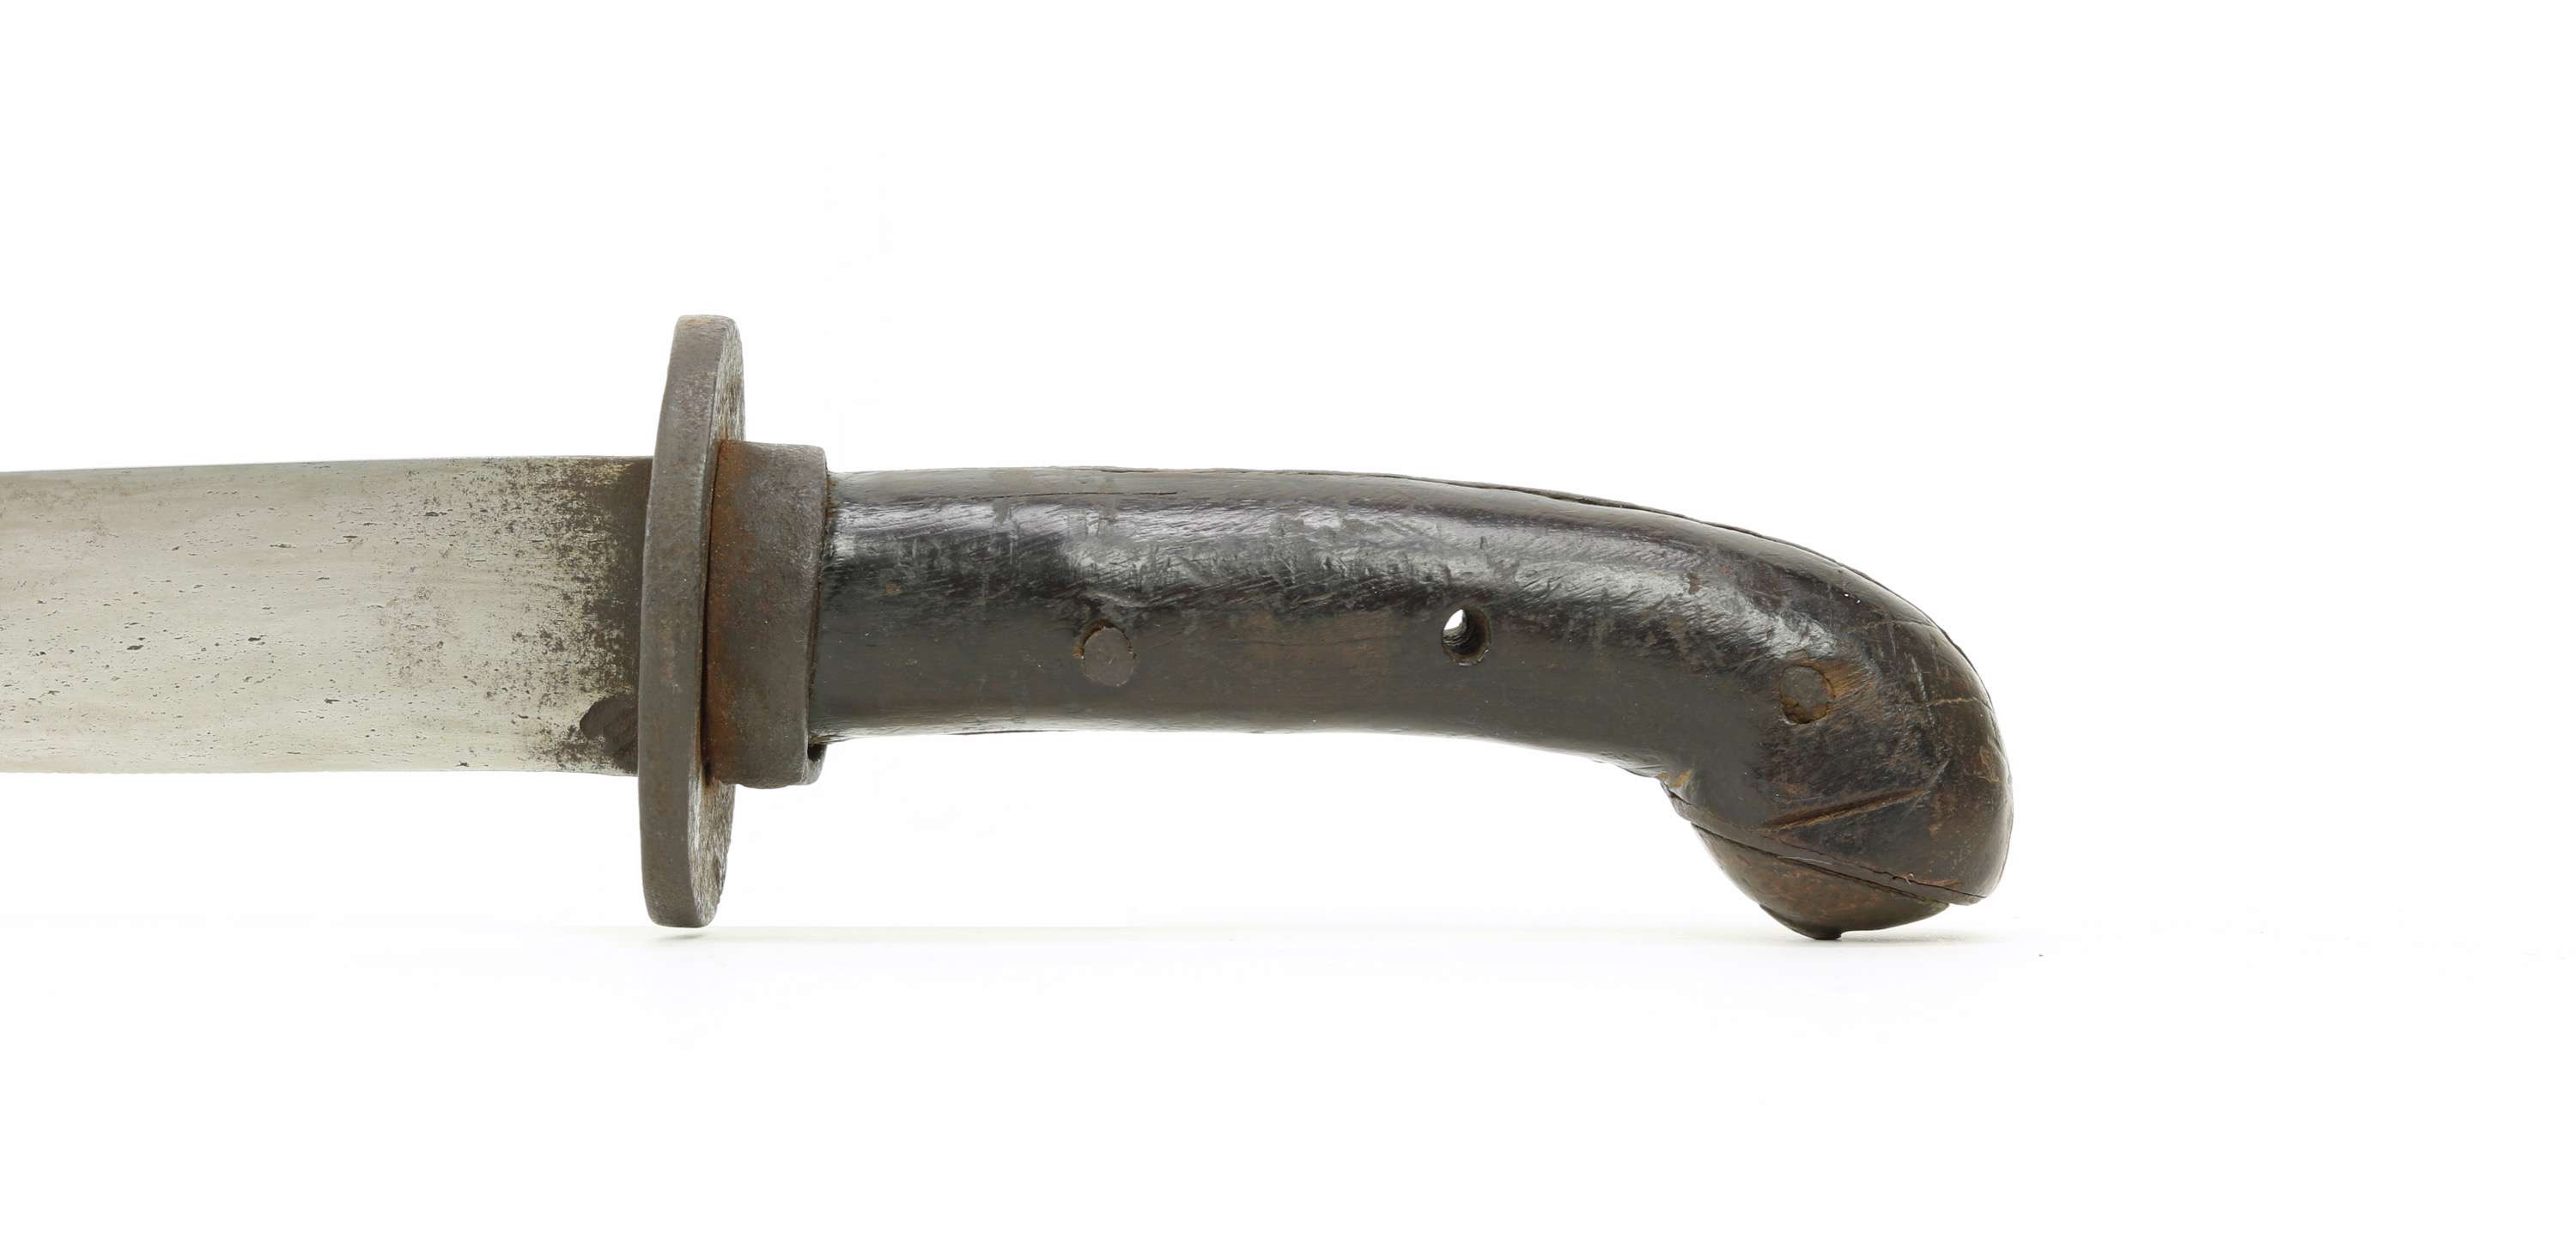 Early Chinese duǎndāo with curved grip